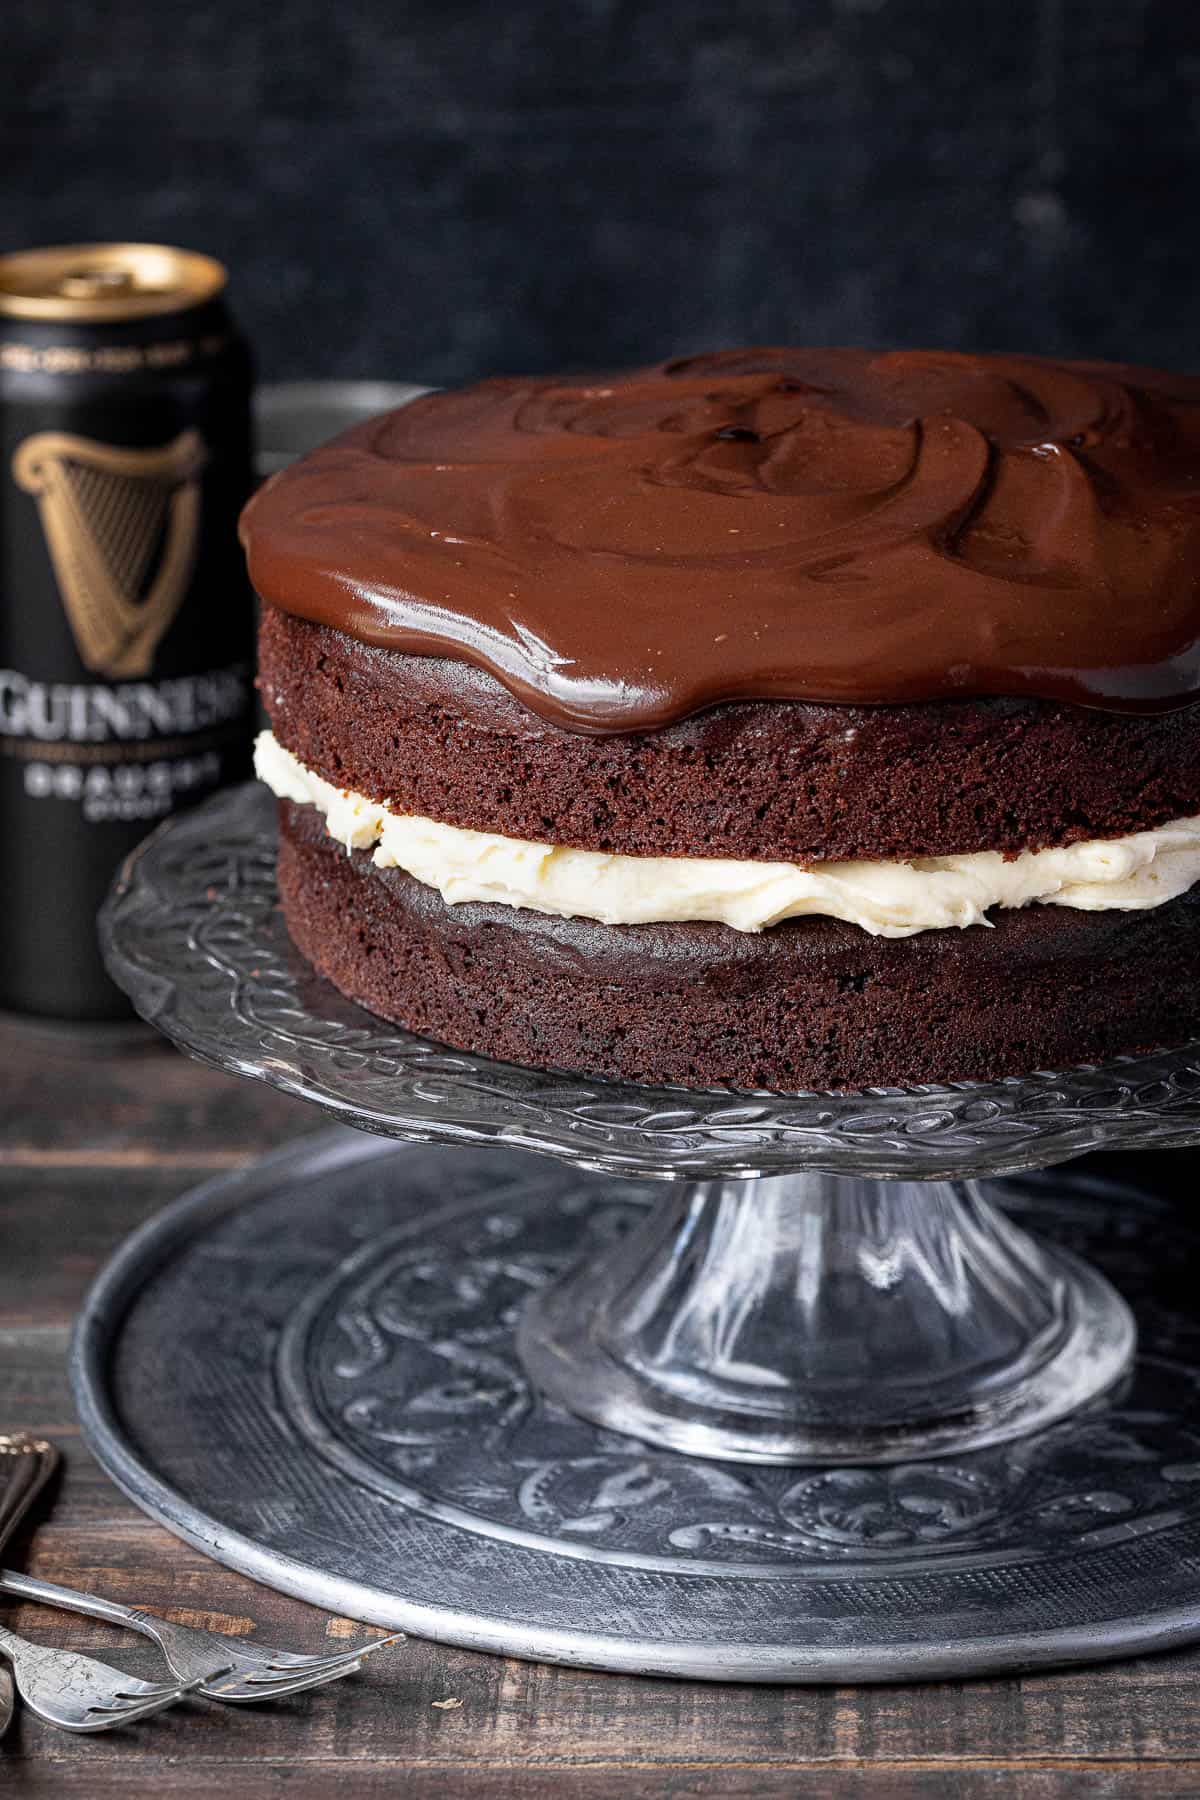 Close up of the guinness cake.